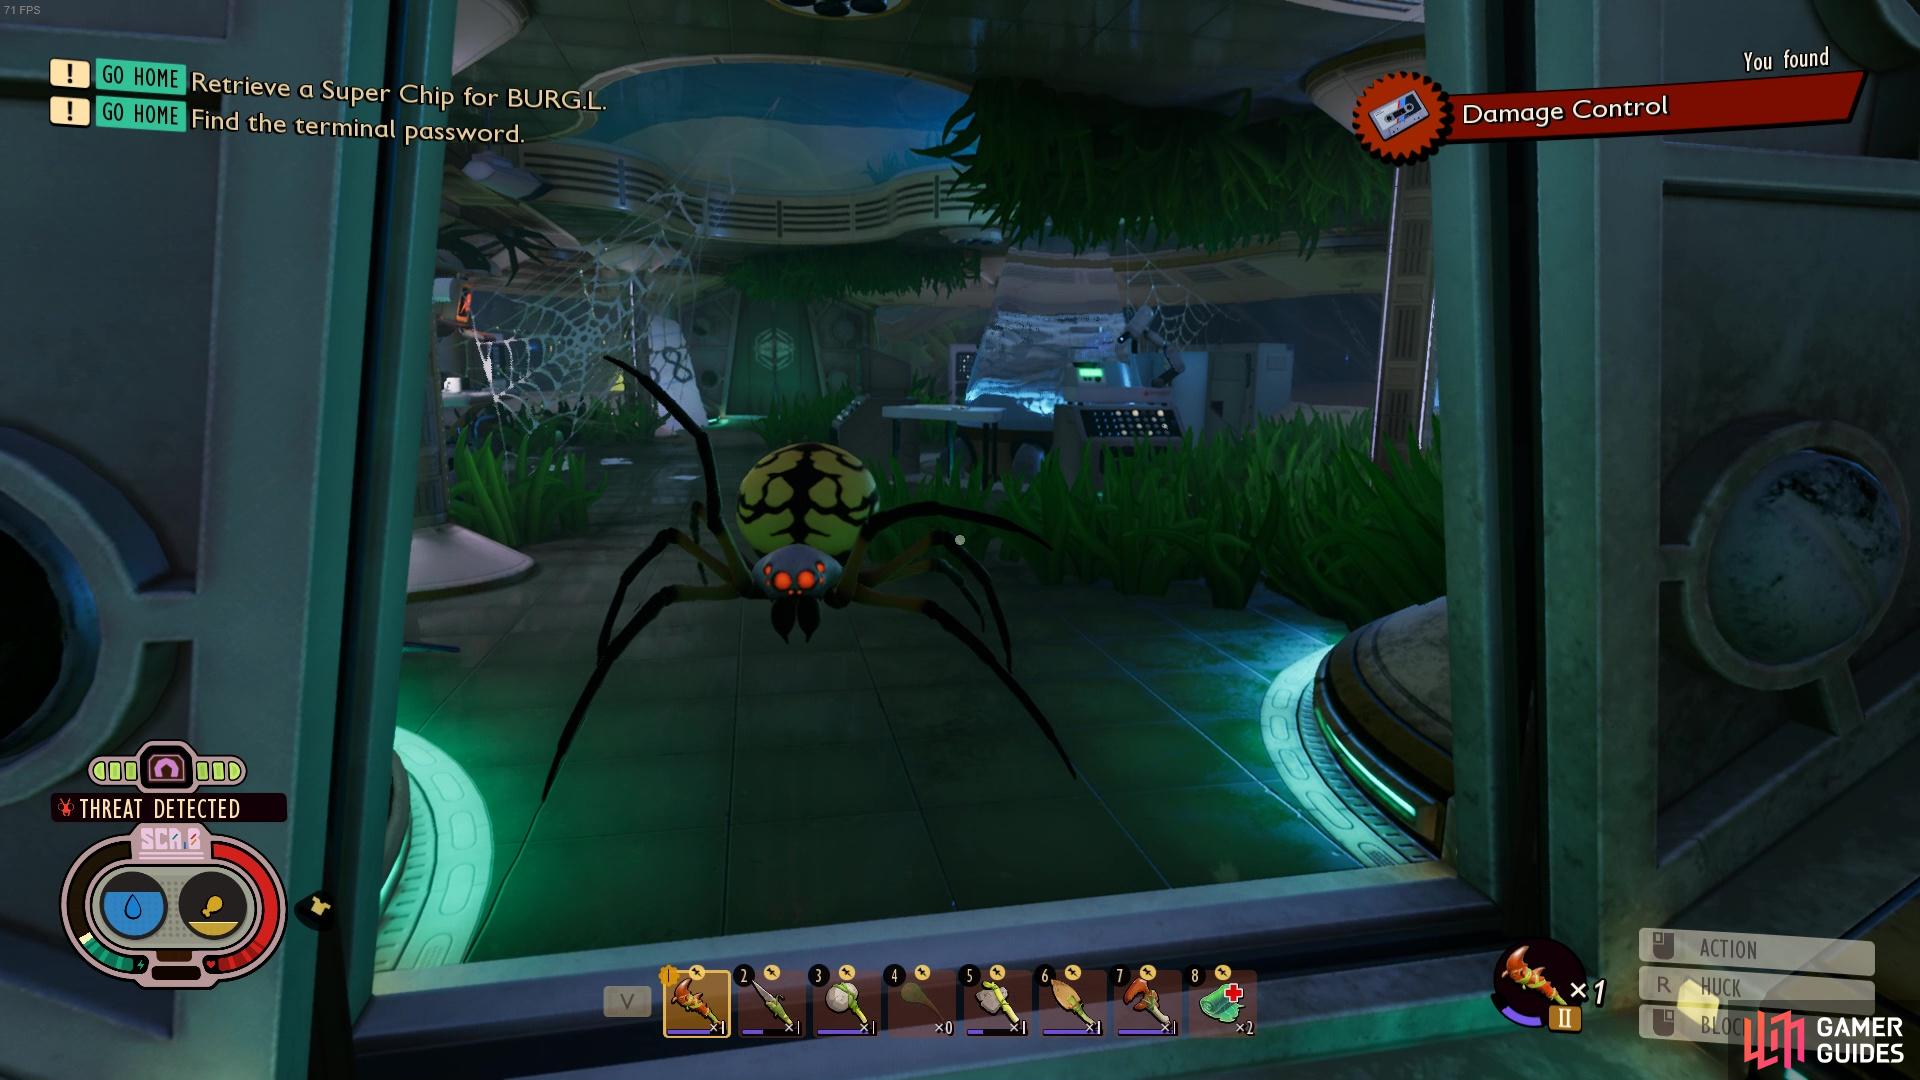 If you’ve been avoiding the big spiders, I’m afraid it’s now time to face your fears!